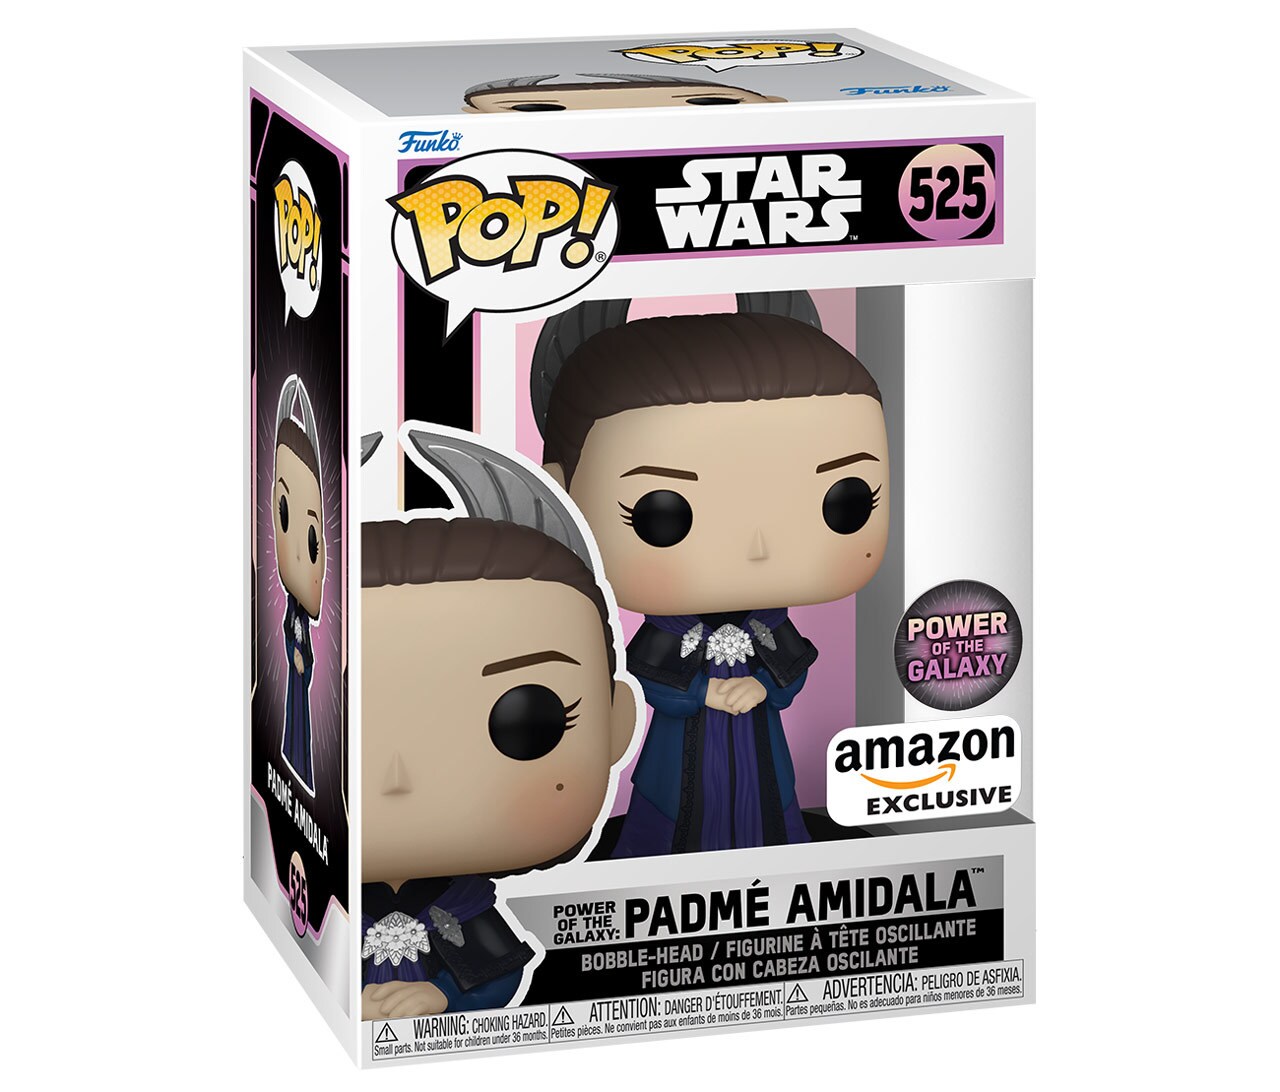  Padmé Pop! bobblehead figure in package for “Power of the Galaxy”